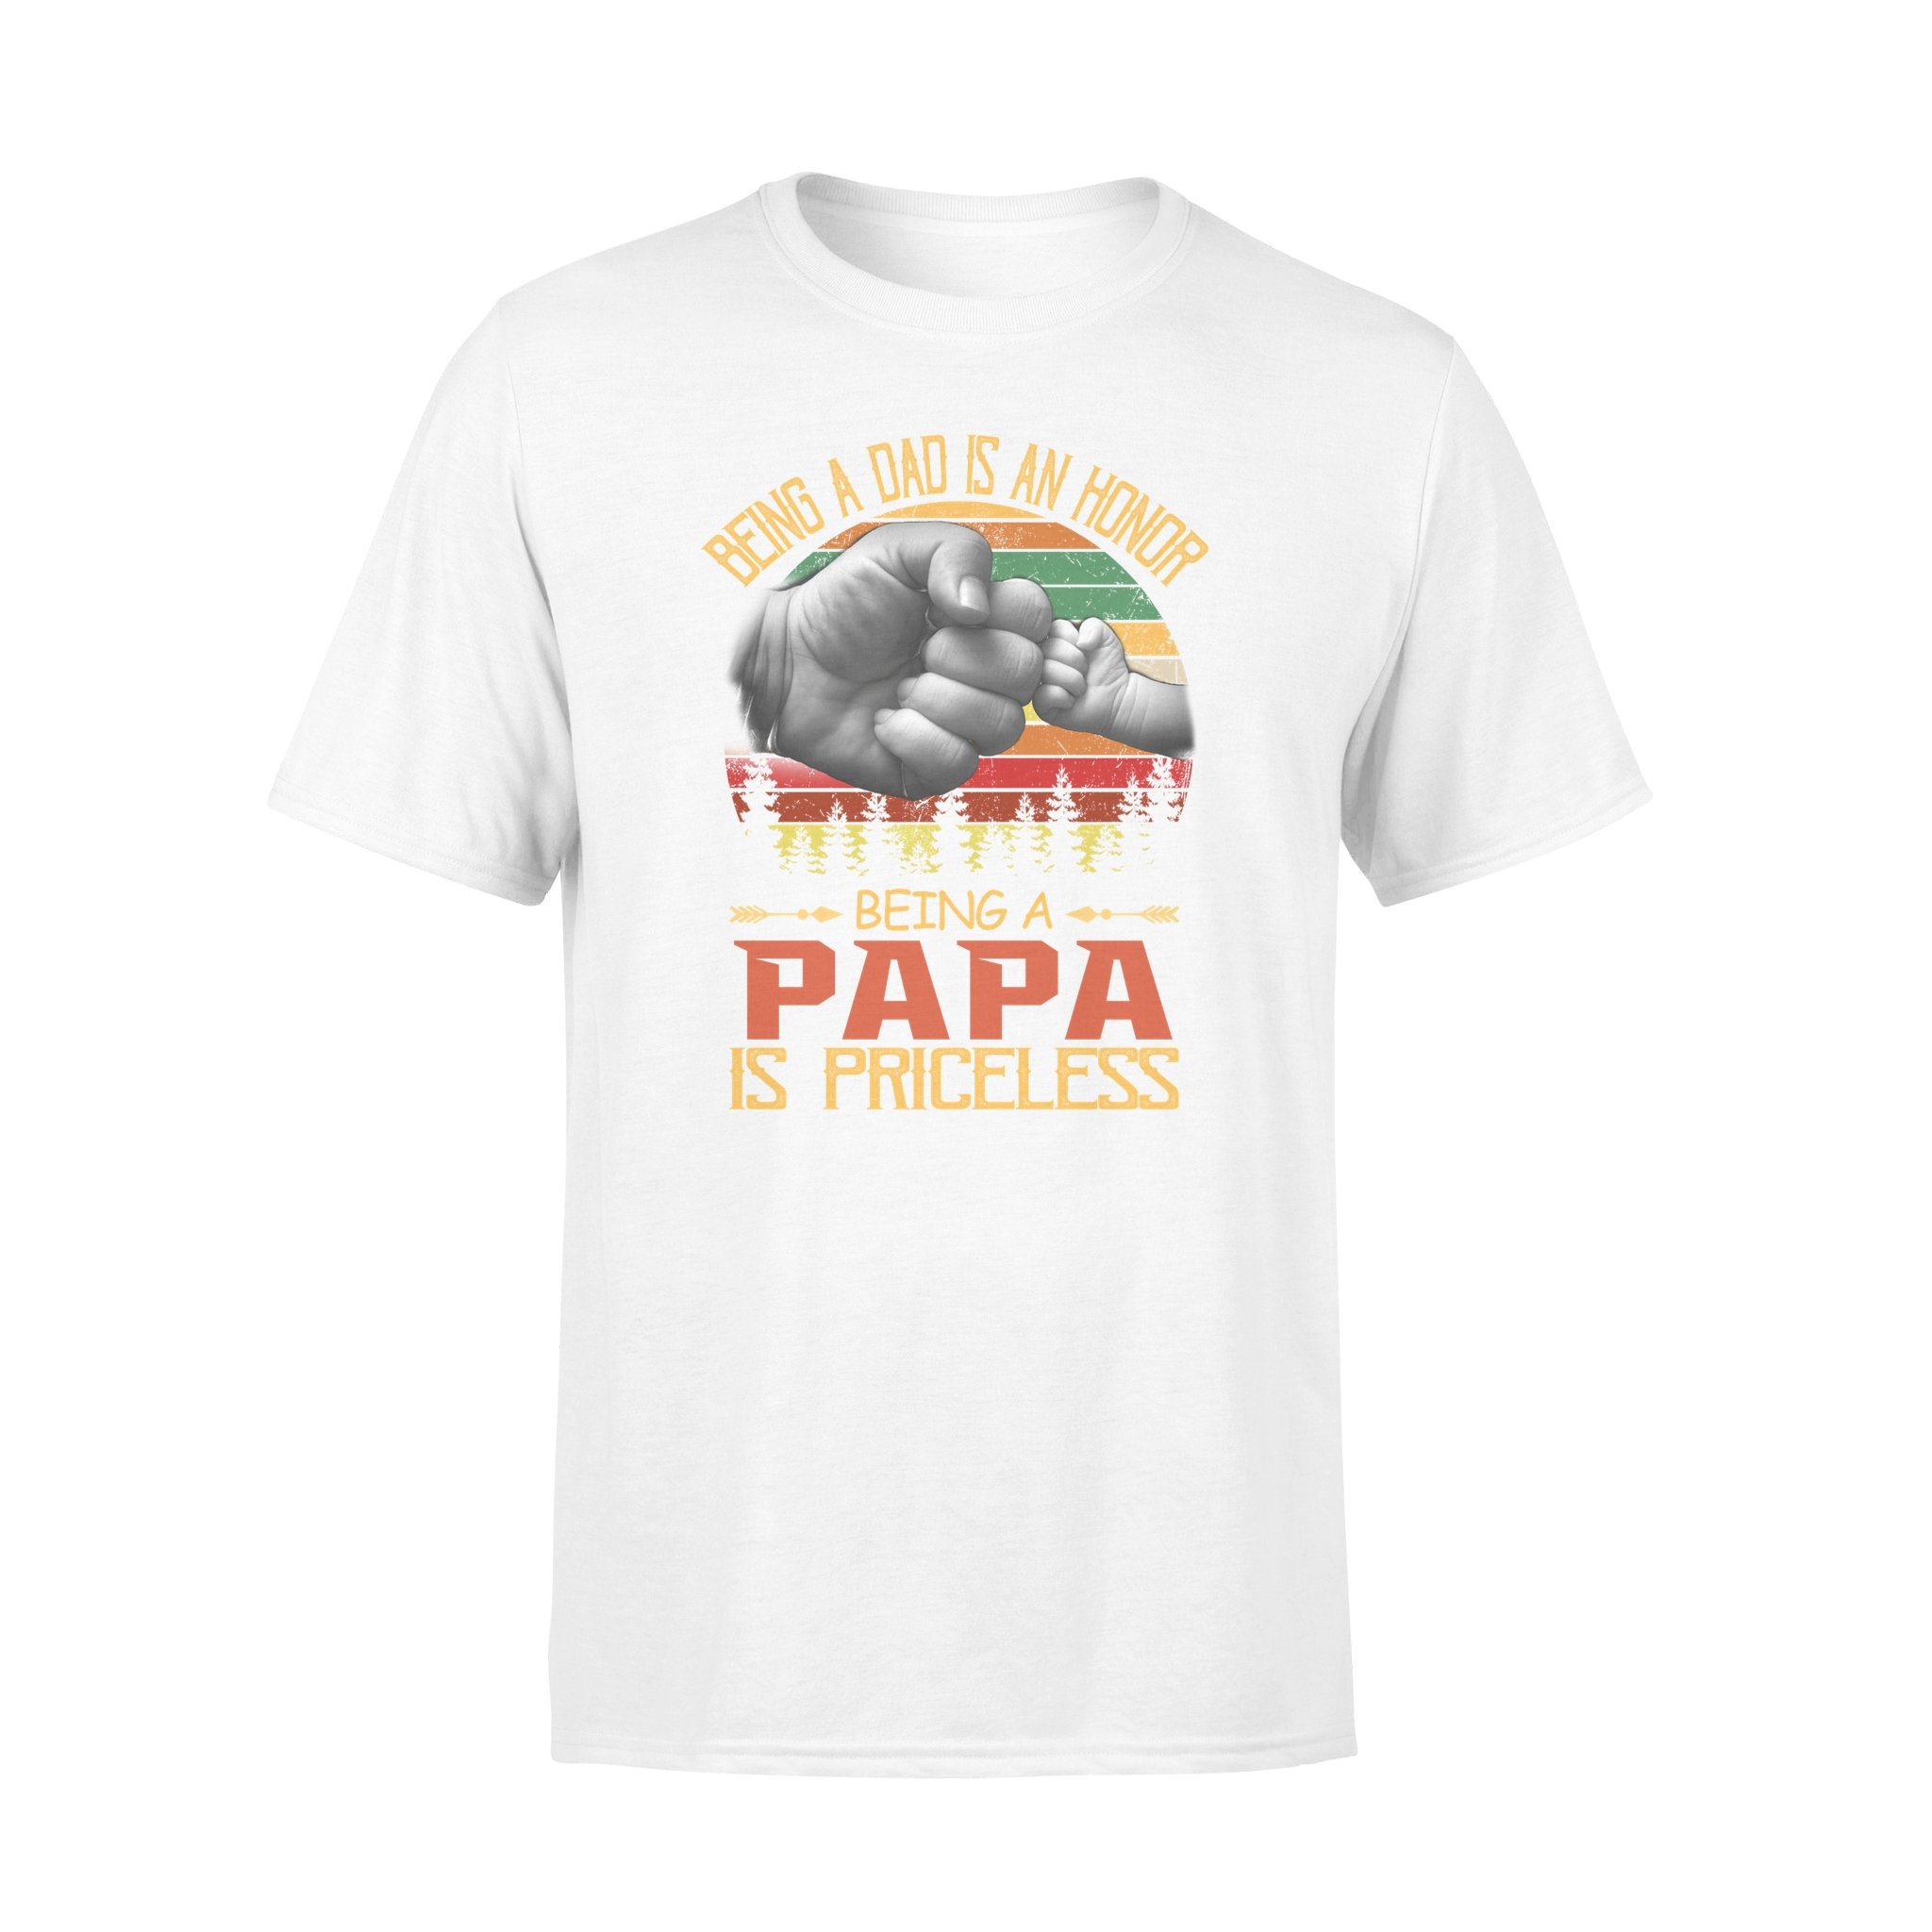 BEING A DAD IS AN HONOR BEING A PAPA IS PRICELESS,  GIFTS FOR GRANDPA,GRANDPA SHIRT,GRANDPA GIFTS,FATHER?S DAY GIFT,PLUS SIZE SHIRT